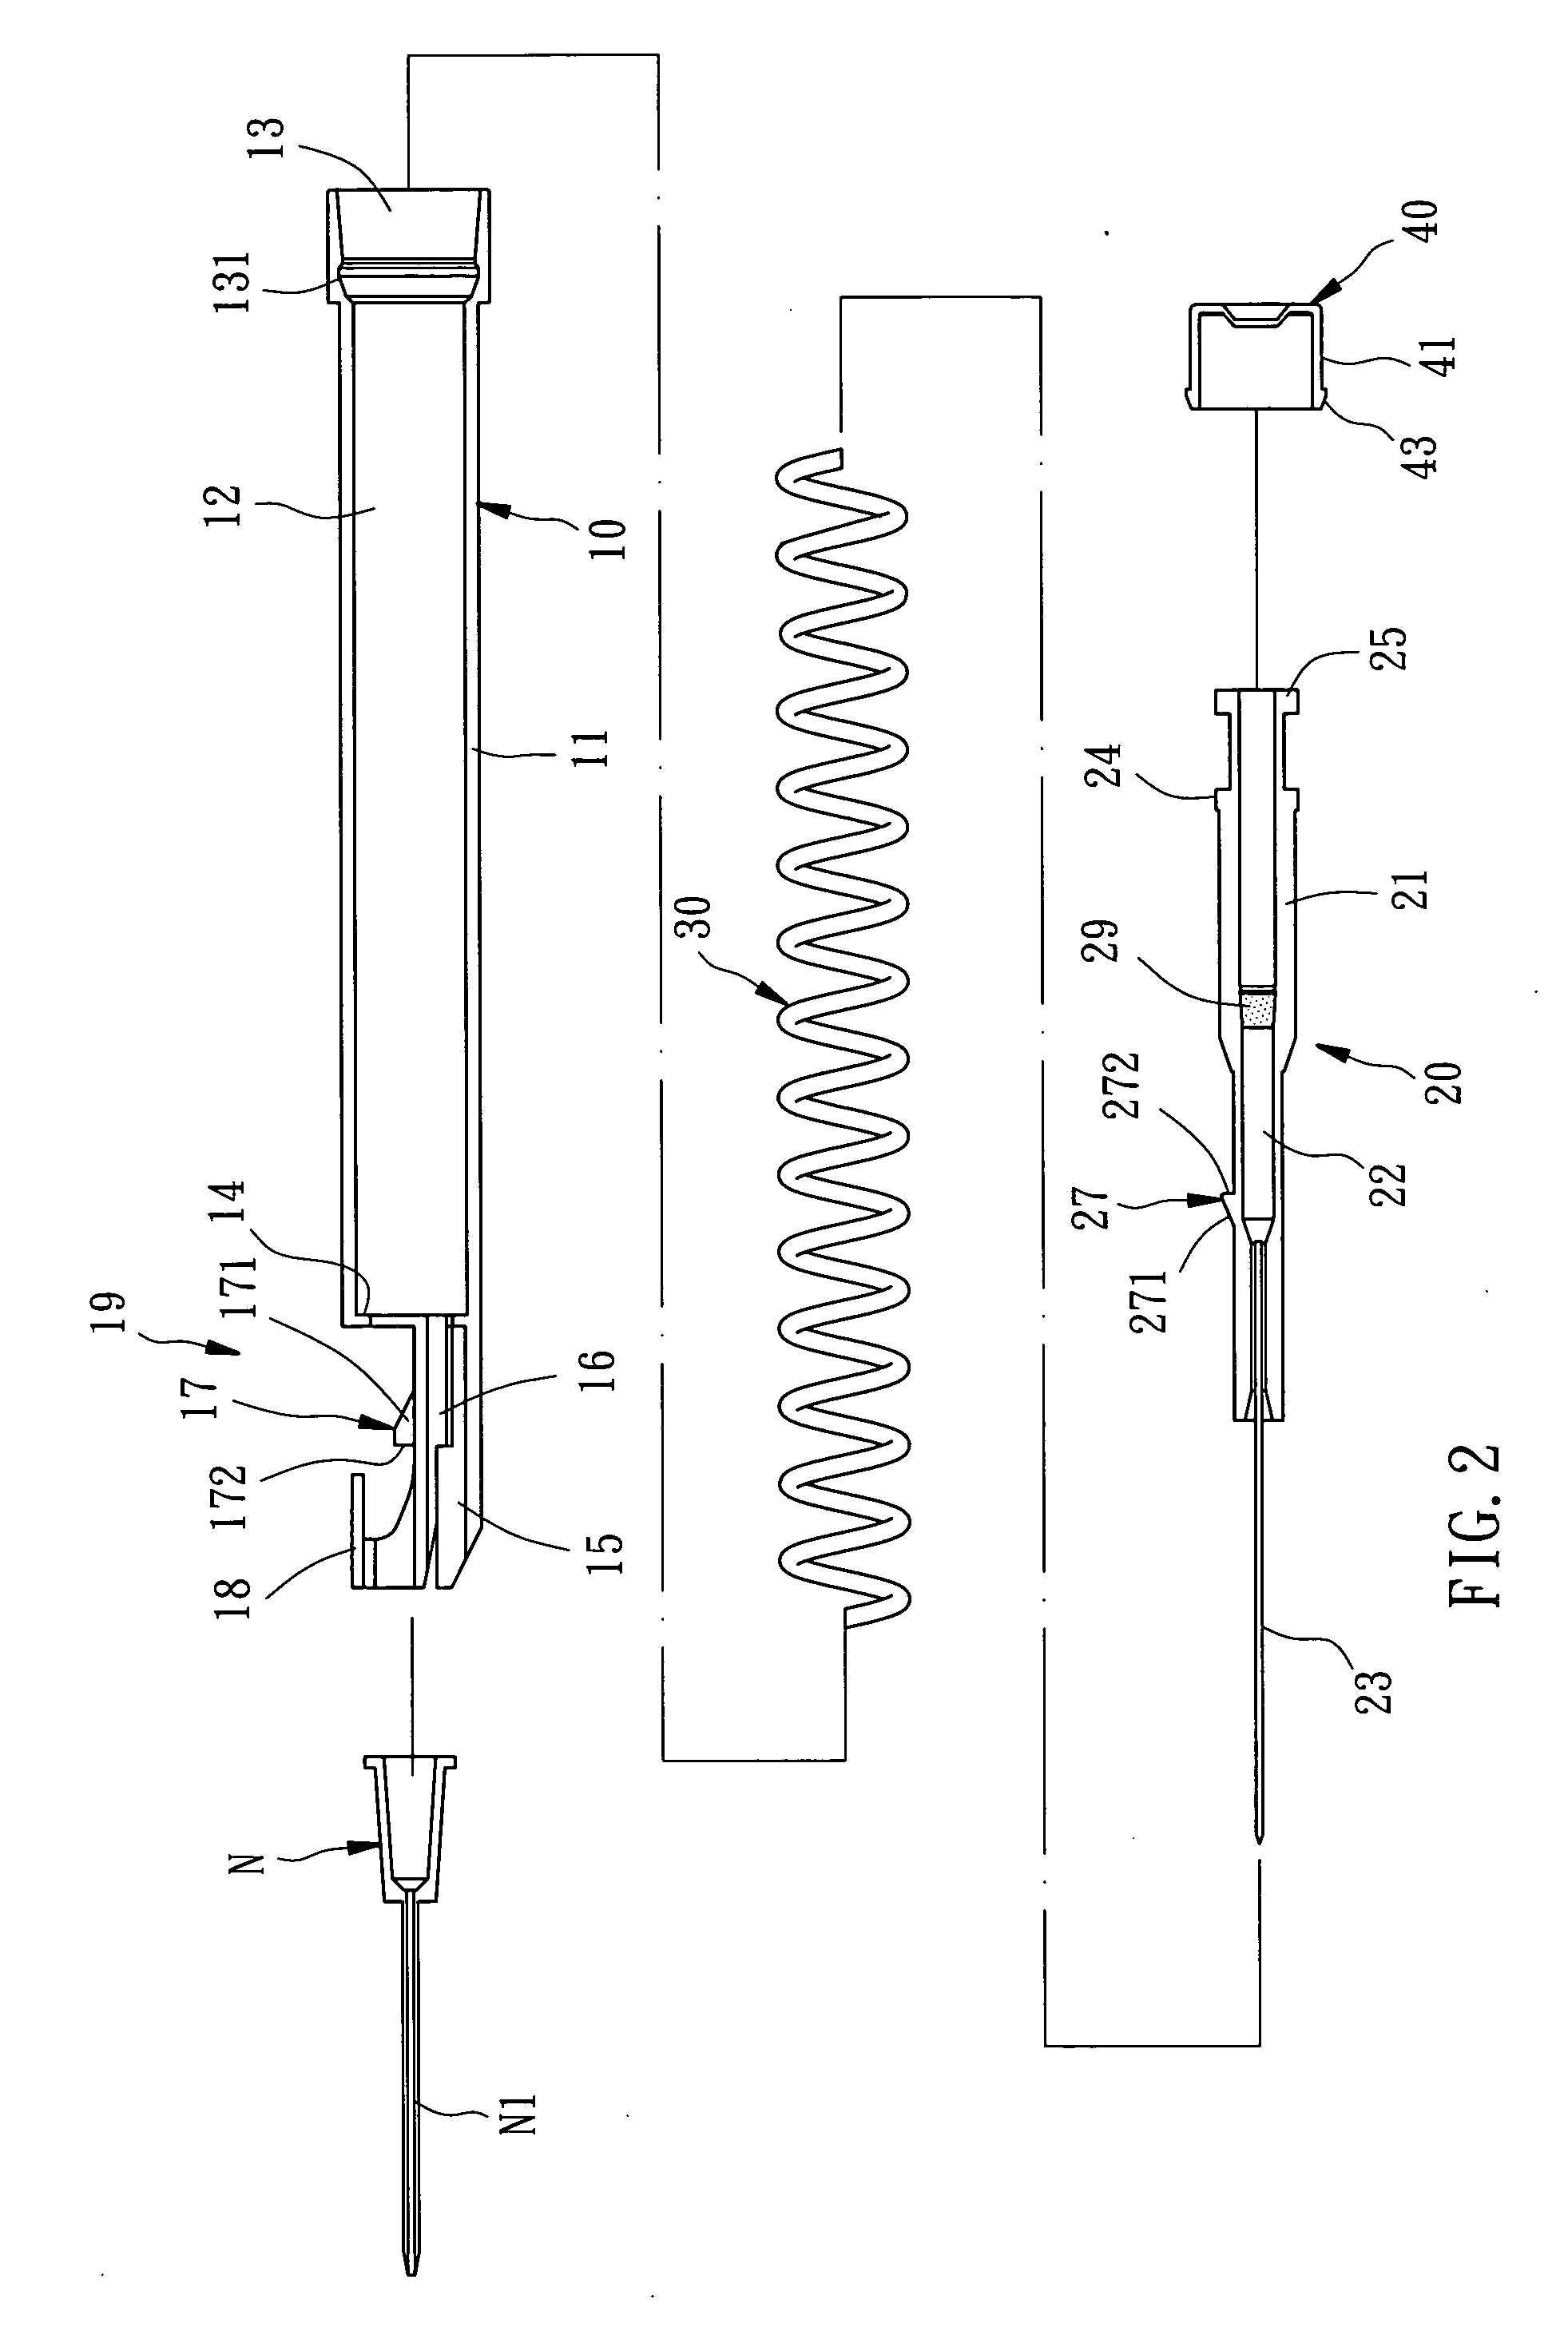 Intravenous catheter insertion device with retractable needle